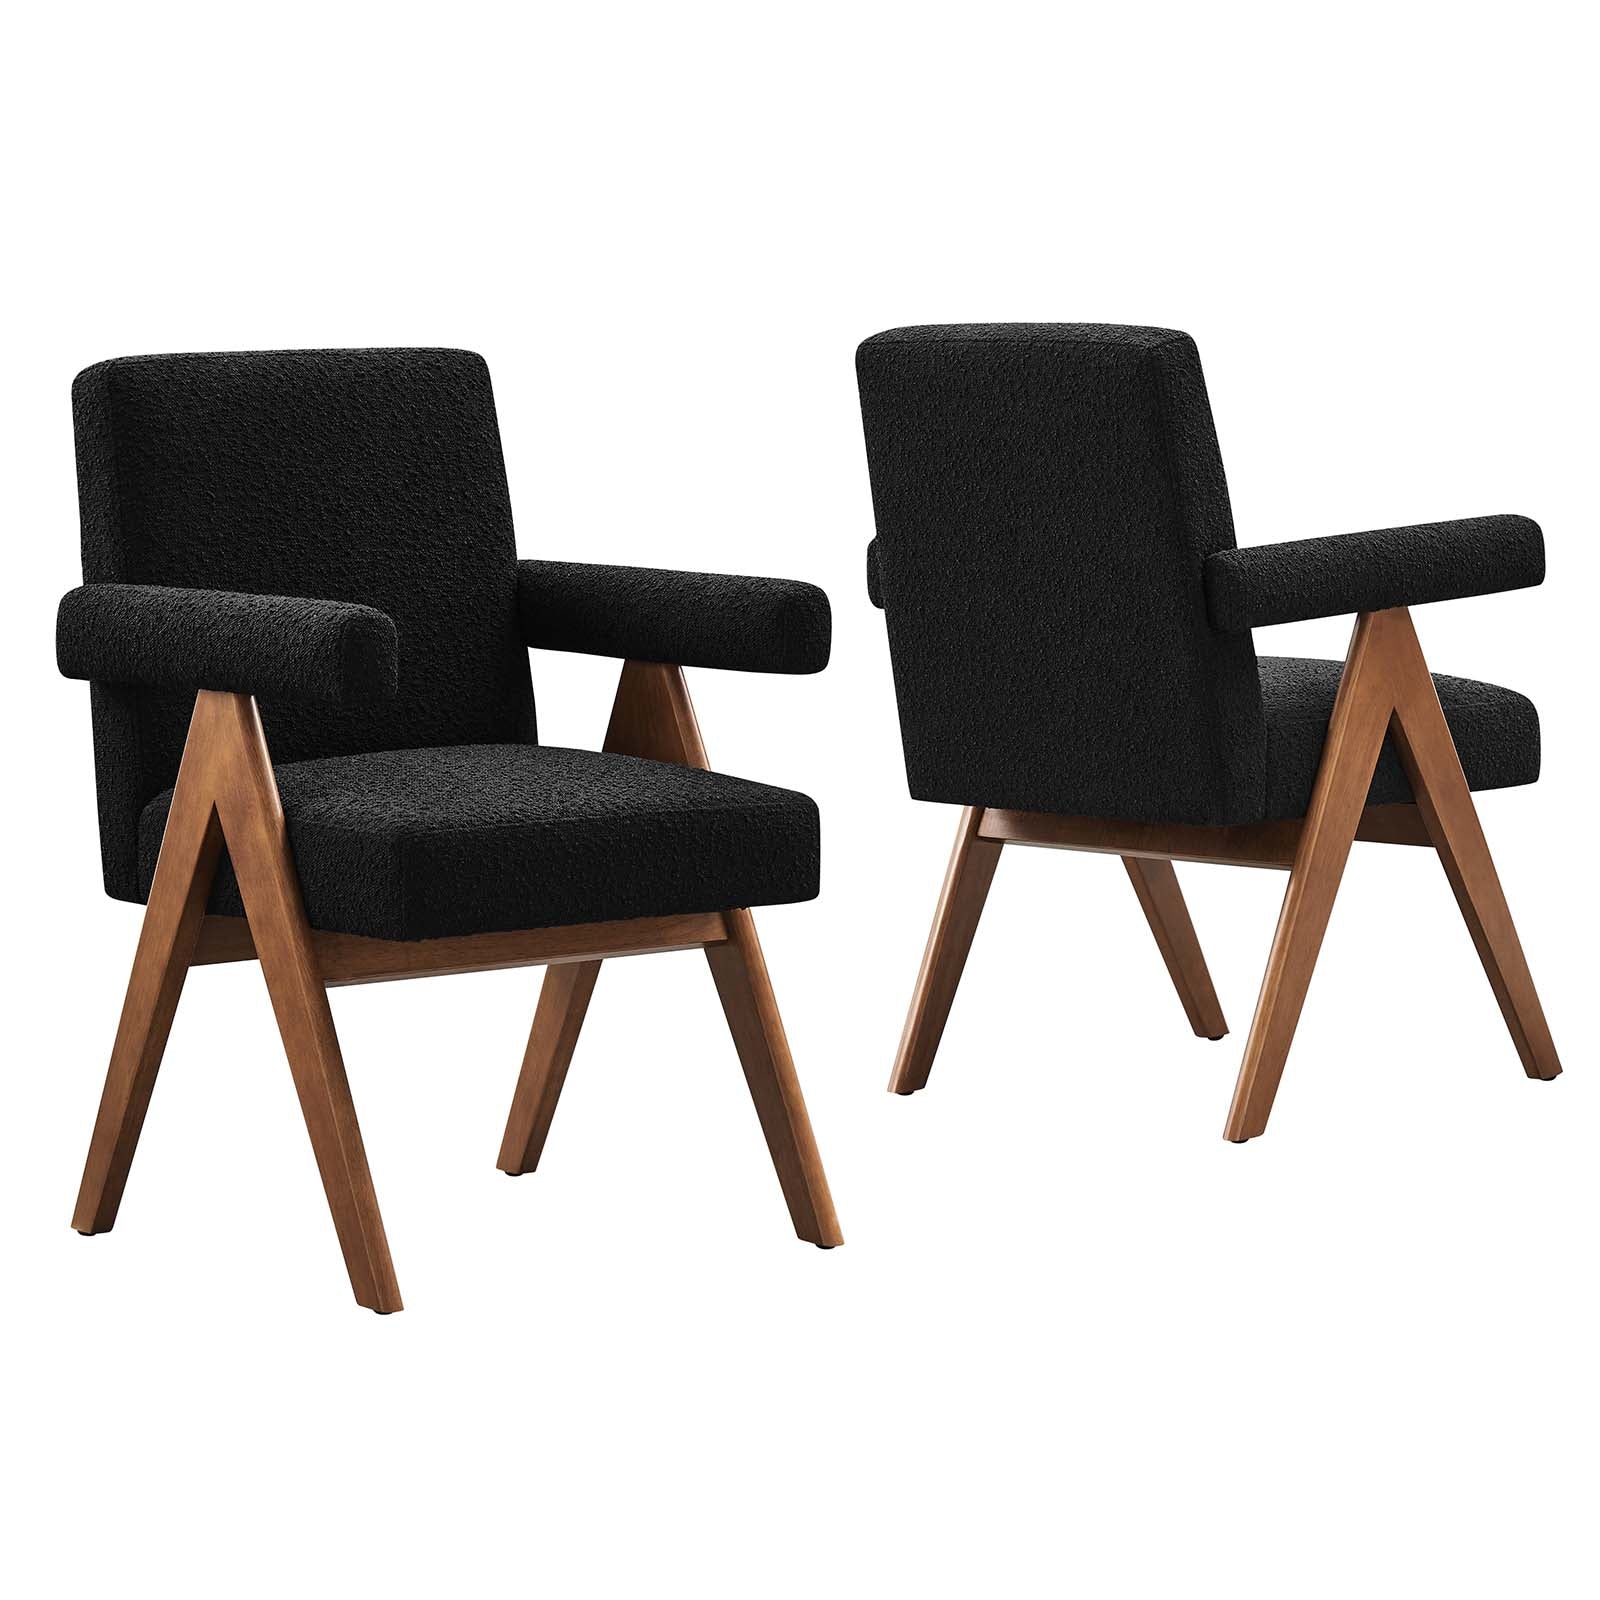 Lyra Boucle Fabric Dining Room Chair - Set of 2 - East Shore Modern Home Furnishings